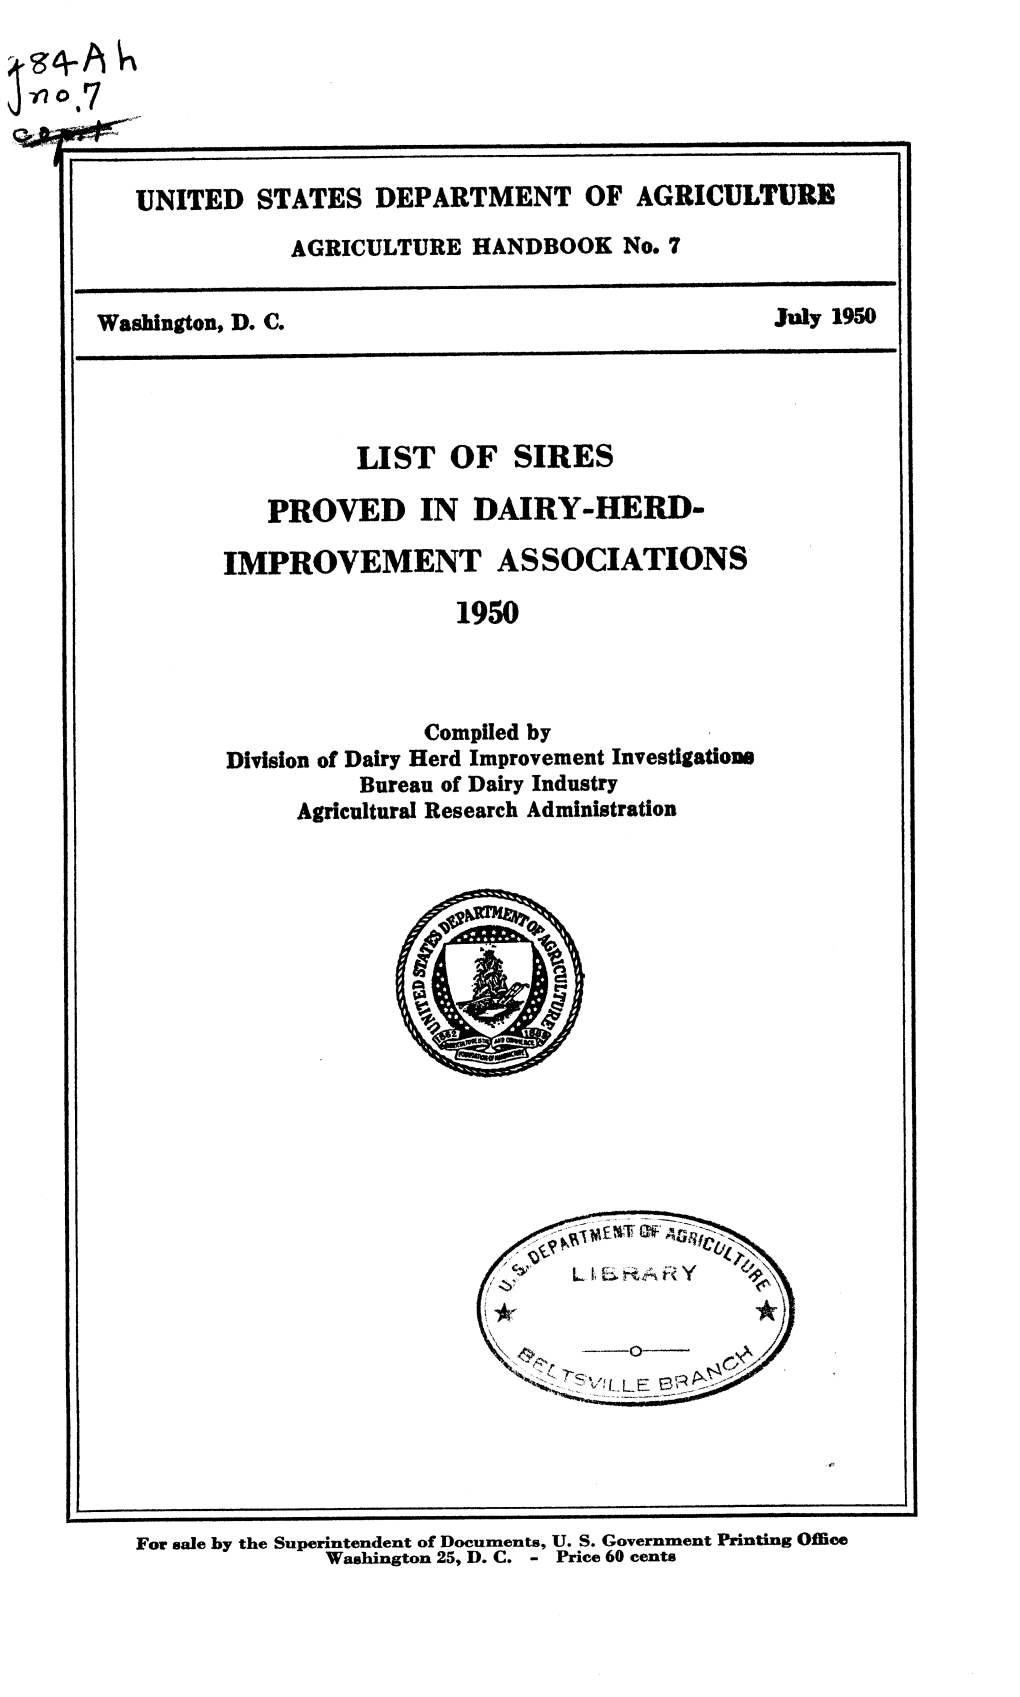 List of Sires Proved in Dairy-Herd- Improvement Associations 1950